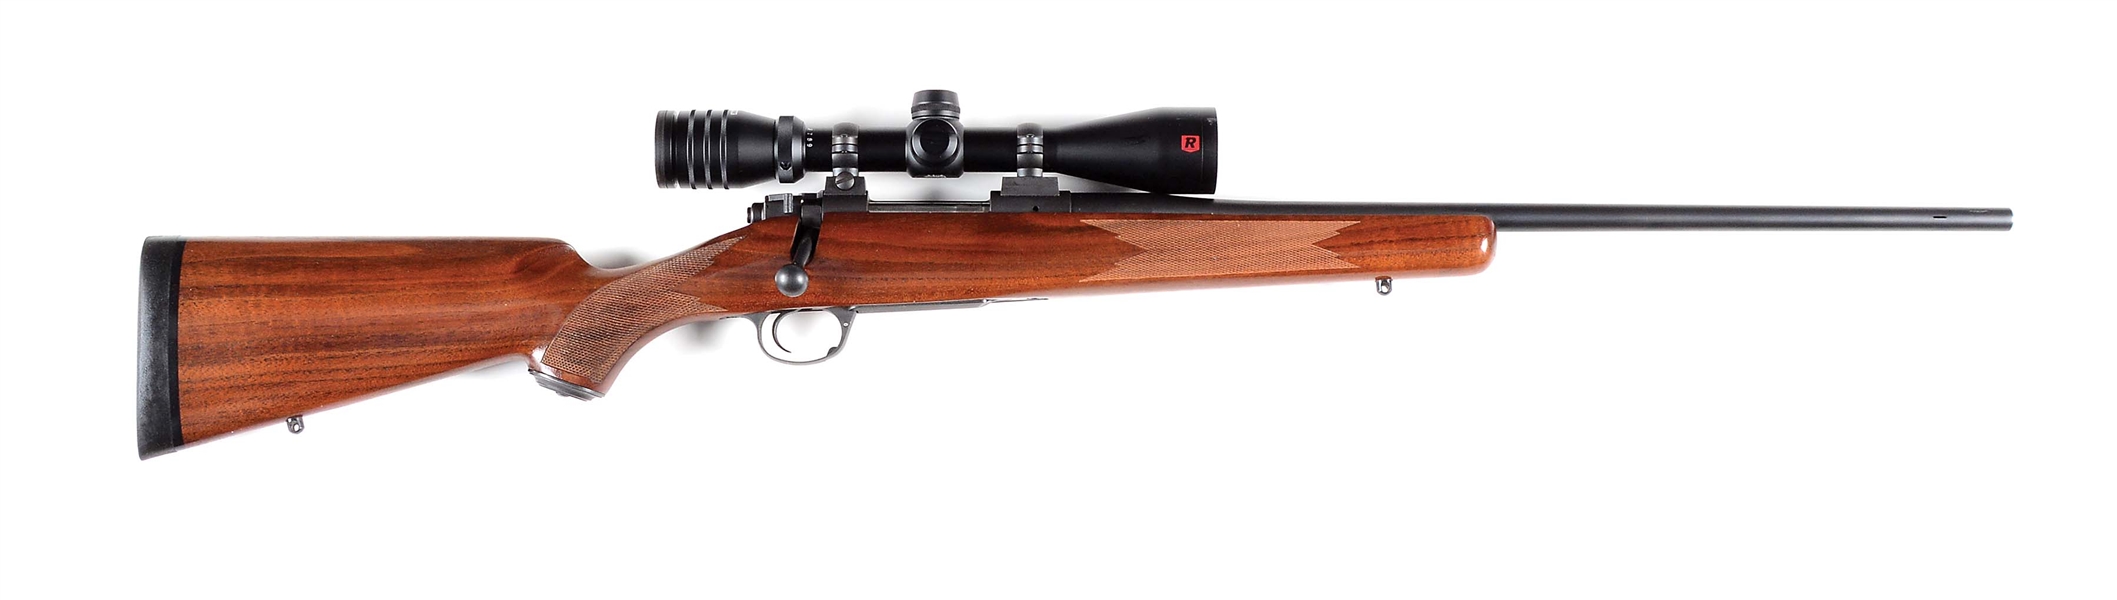 (M) KIMBER 84M .338 FEDERAL BOLT ACTION RIFLE WITH SCOPE.